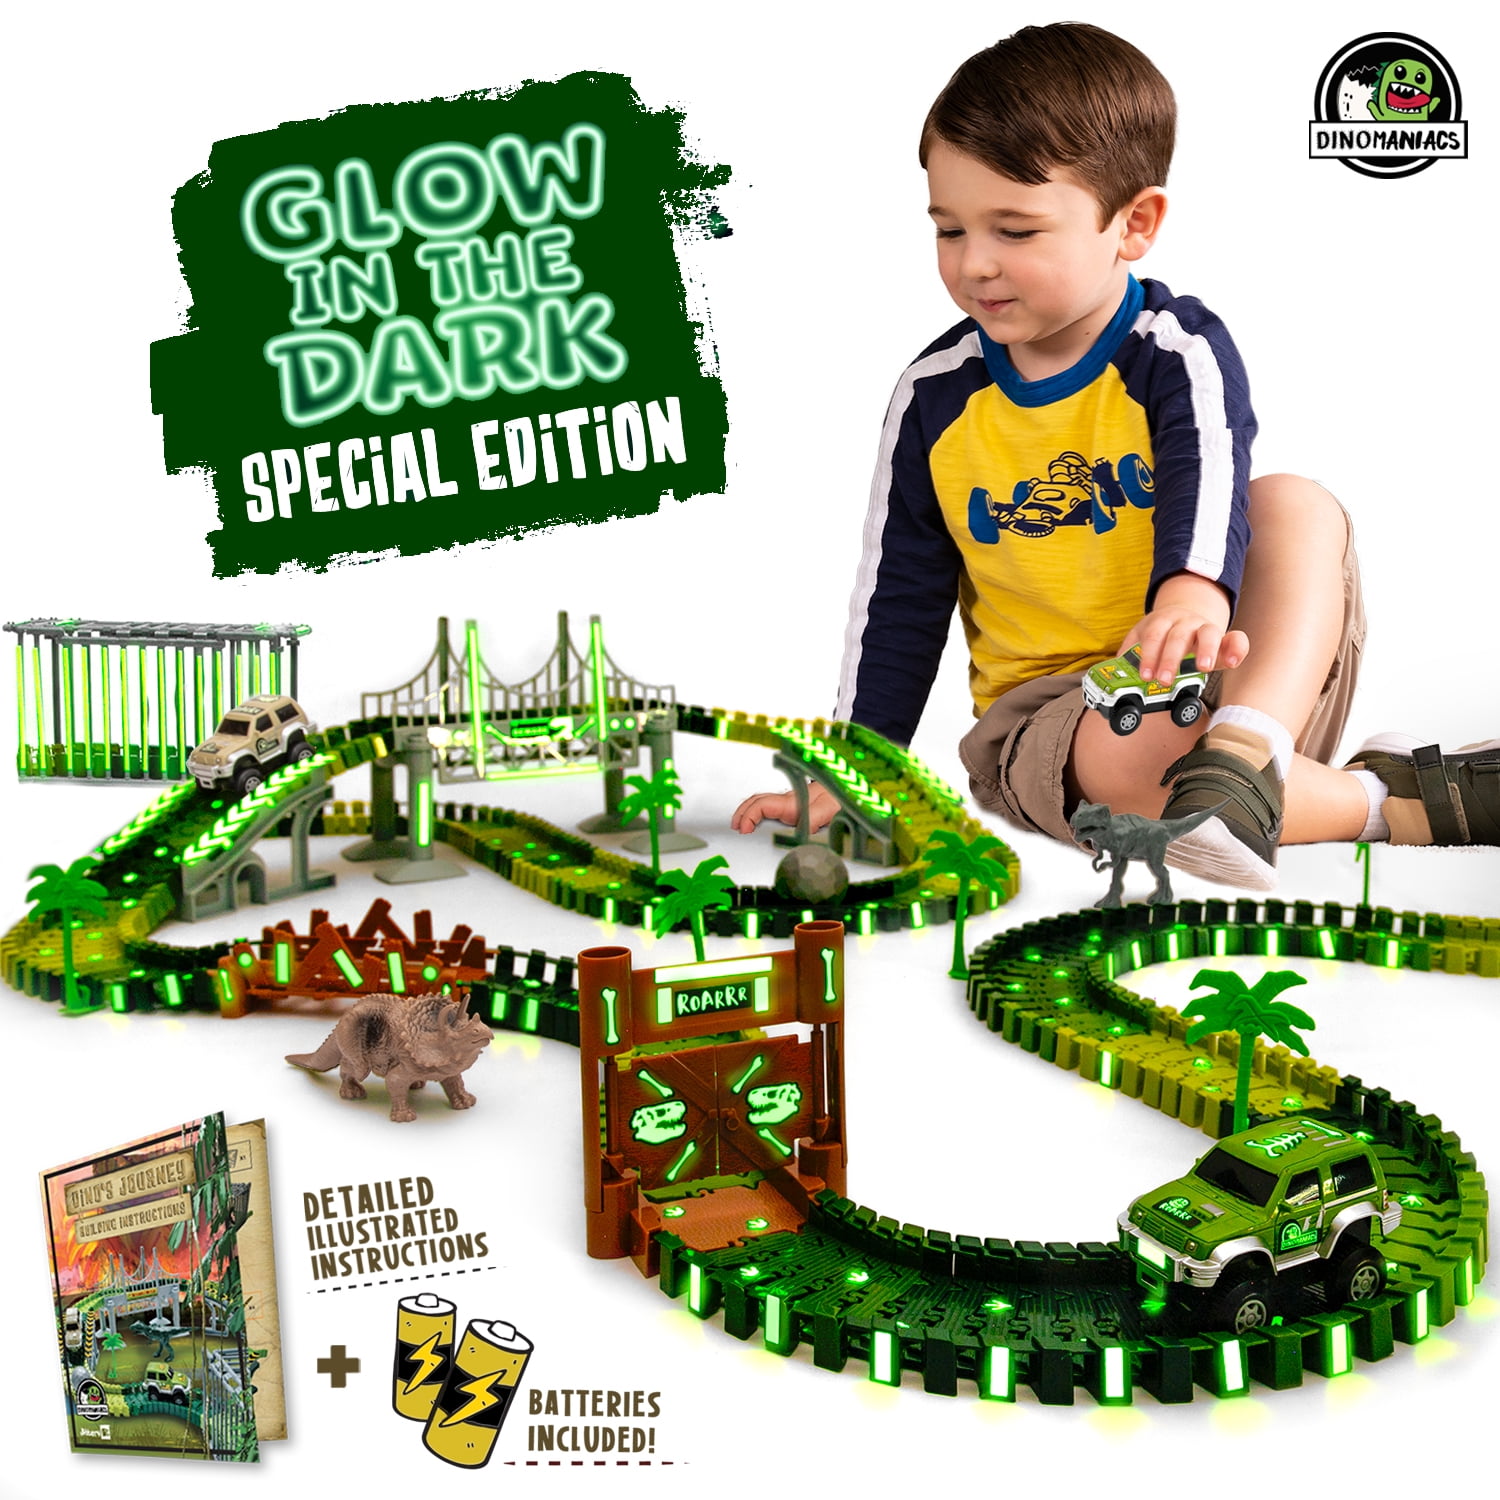 Car Race Track Train Tracks Set with 1 Car and 3 Dinosaurs Toys for Boys Toddlers Kids Game Gifts Playset Dinosaur Race Track 